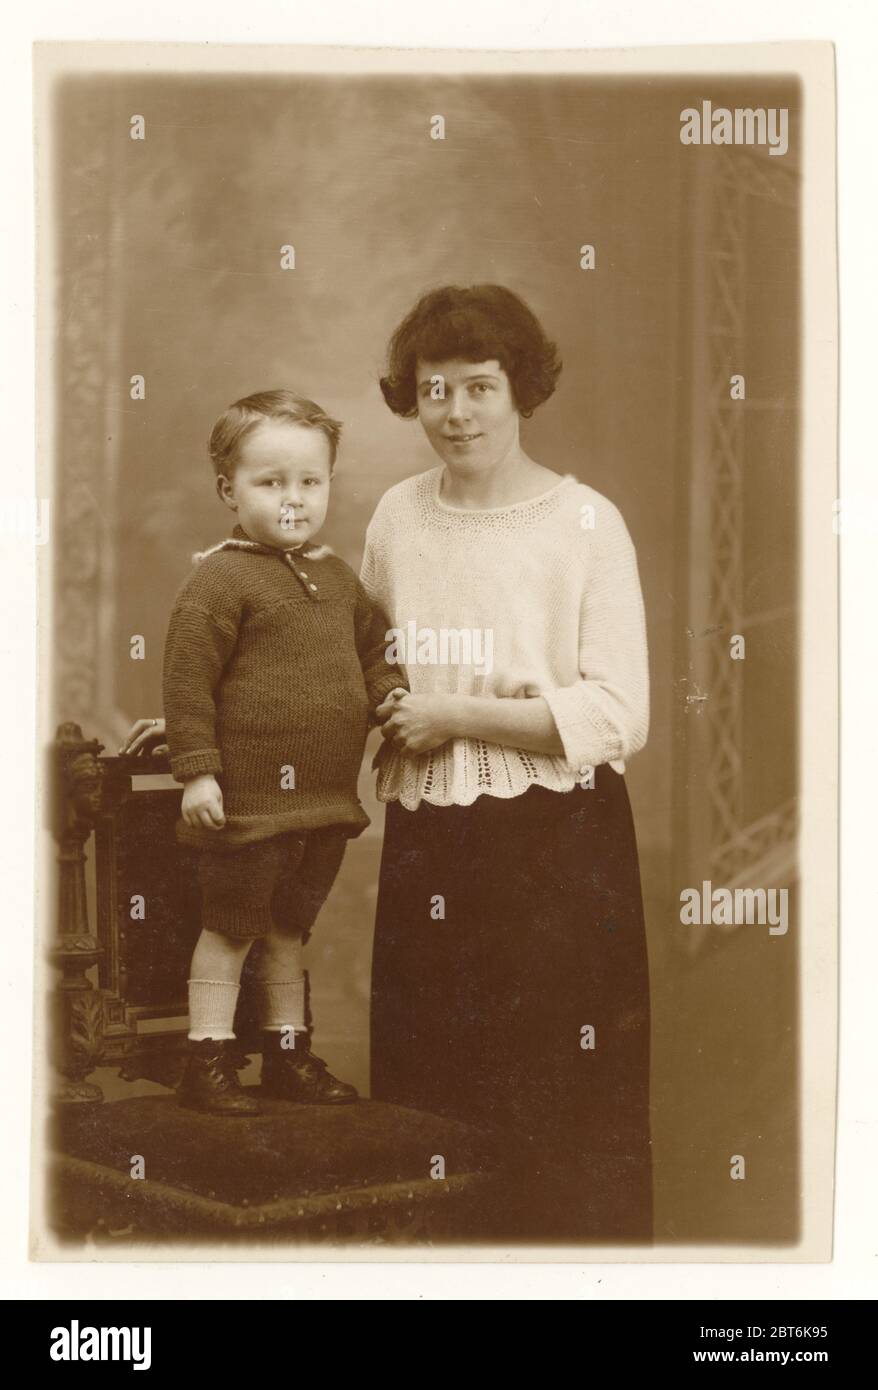 Early 1900's postcard of mother in fashionable crocheted jumper, with her son. circa 1921, Nelson, near Burnley, Lancashire, England, U.K. Stock Photo